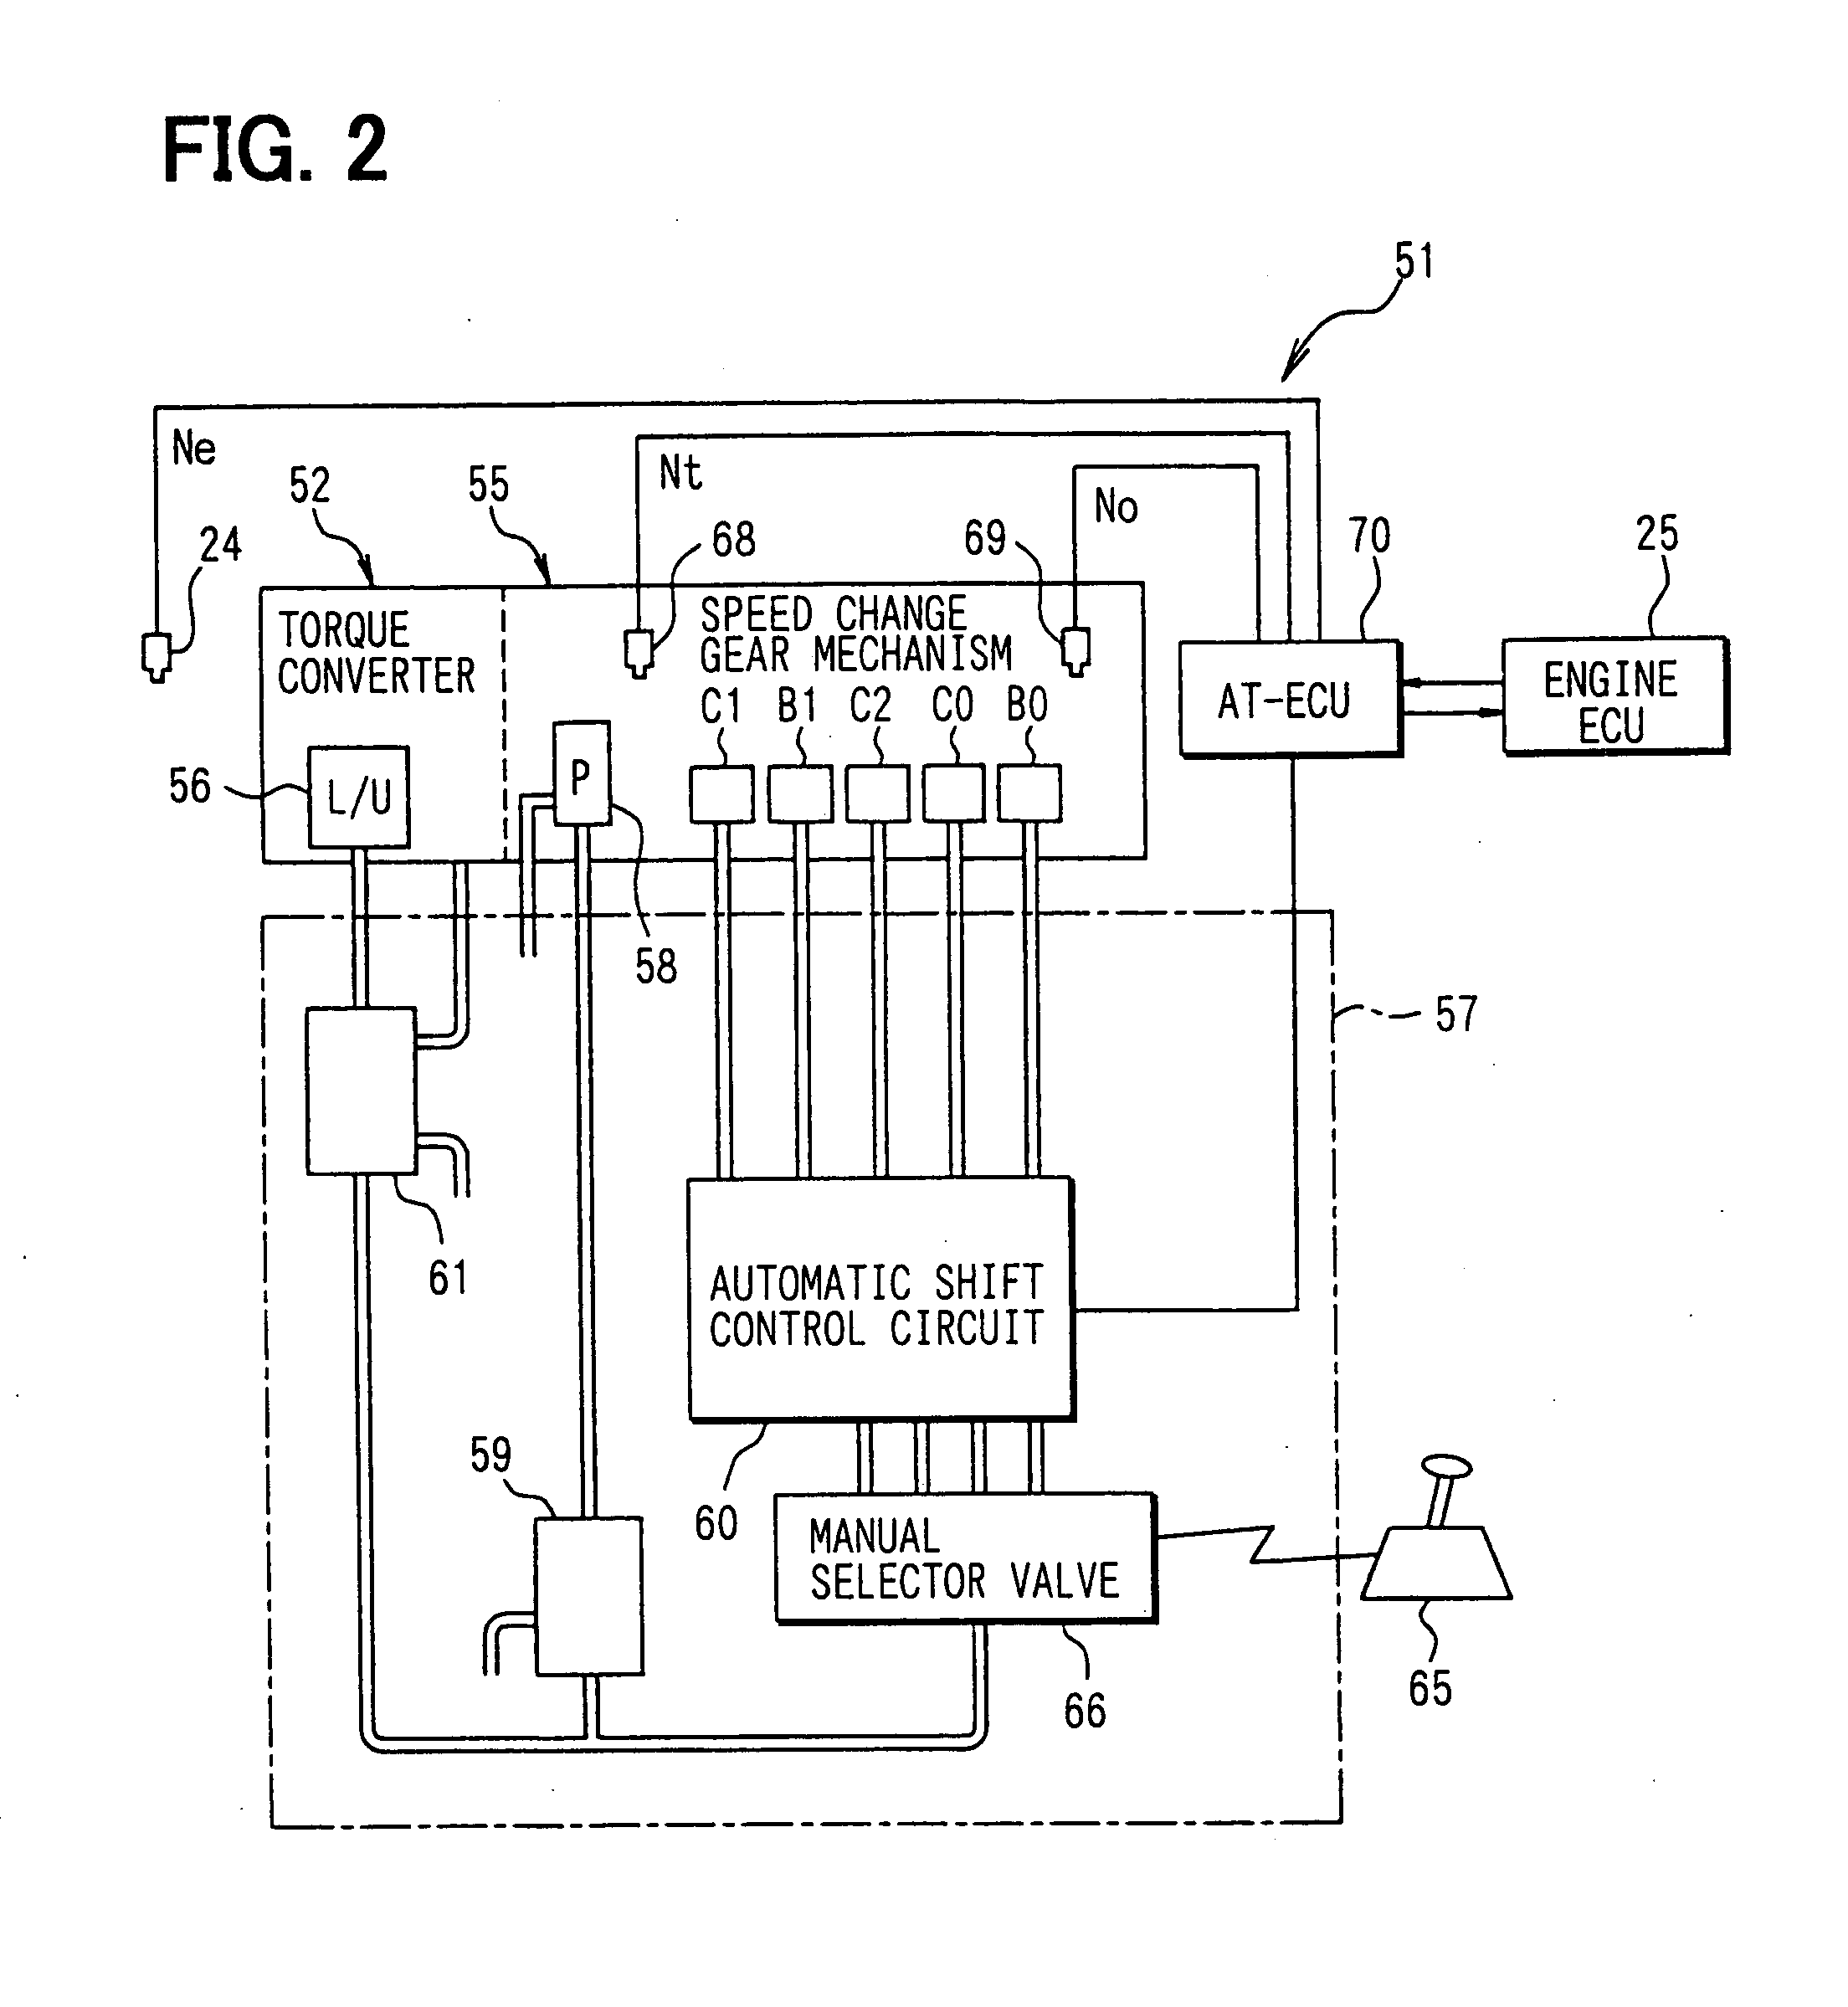 Controller for automatic transmission